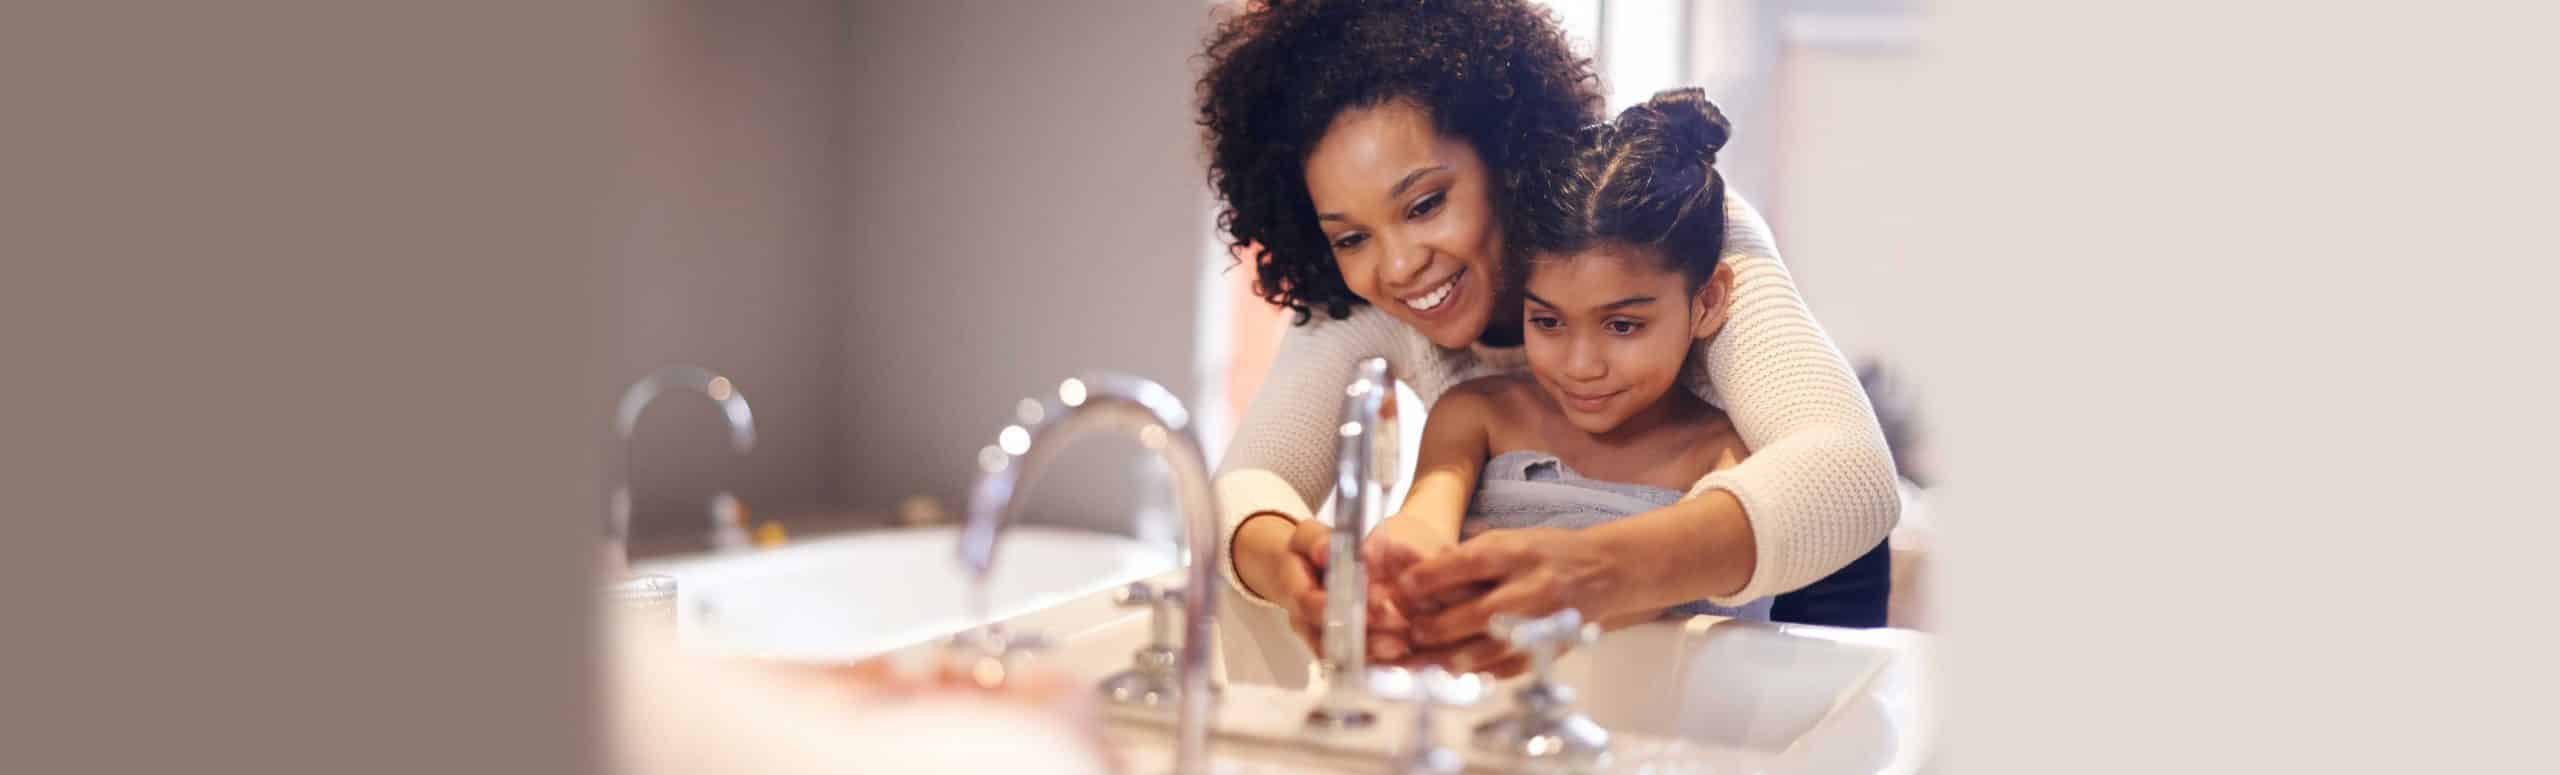 Mother and daughter washing hands together in a bathroom